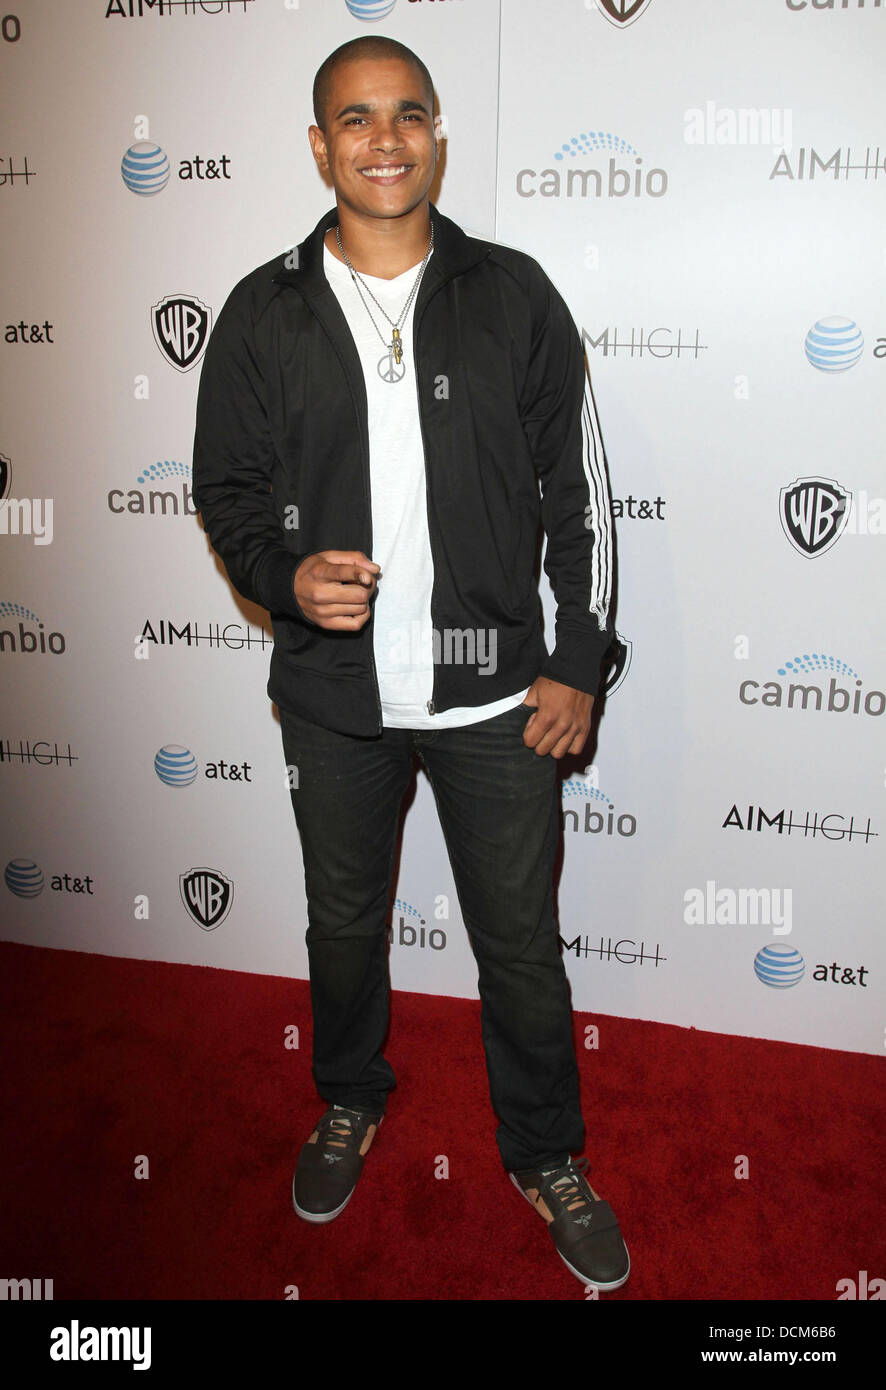 Jonathan McDaniel Cambio And Warner Bros. Digital Distribution celebrates the premiere of 1st Social Series 'Aim High' at Trousdale West Hollywood, California - 18.10.11 Stock Photo